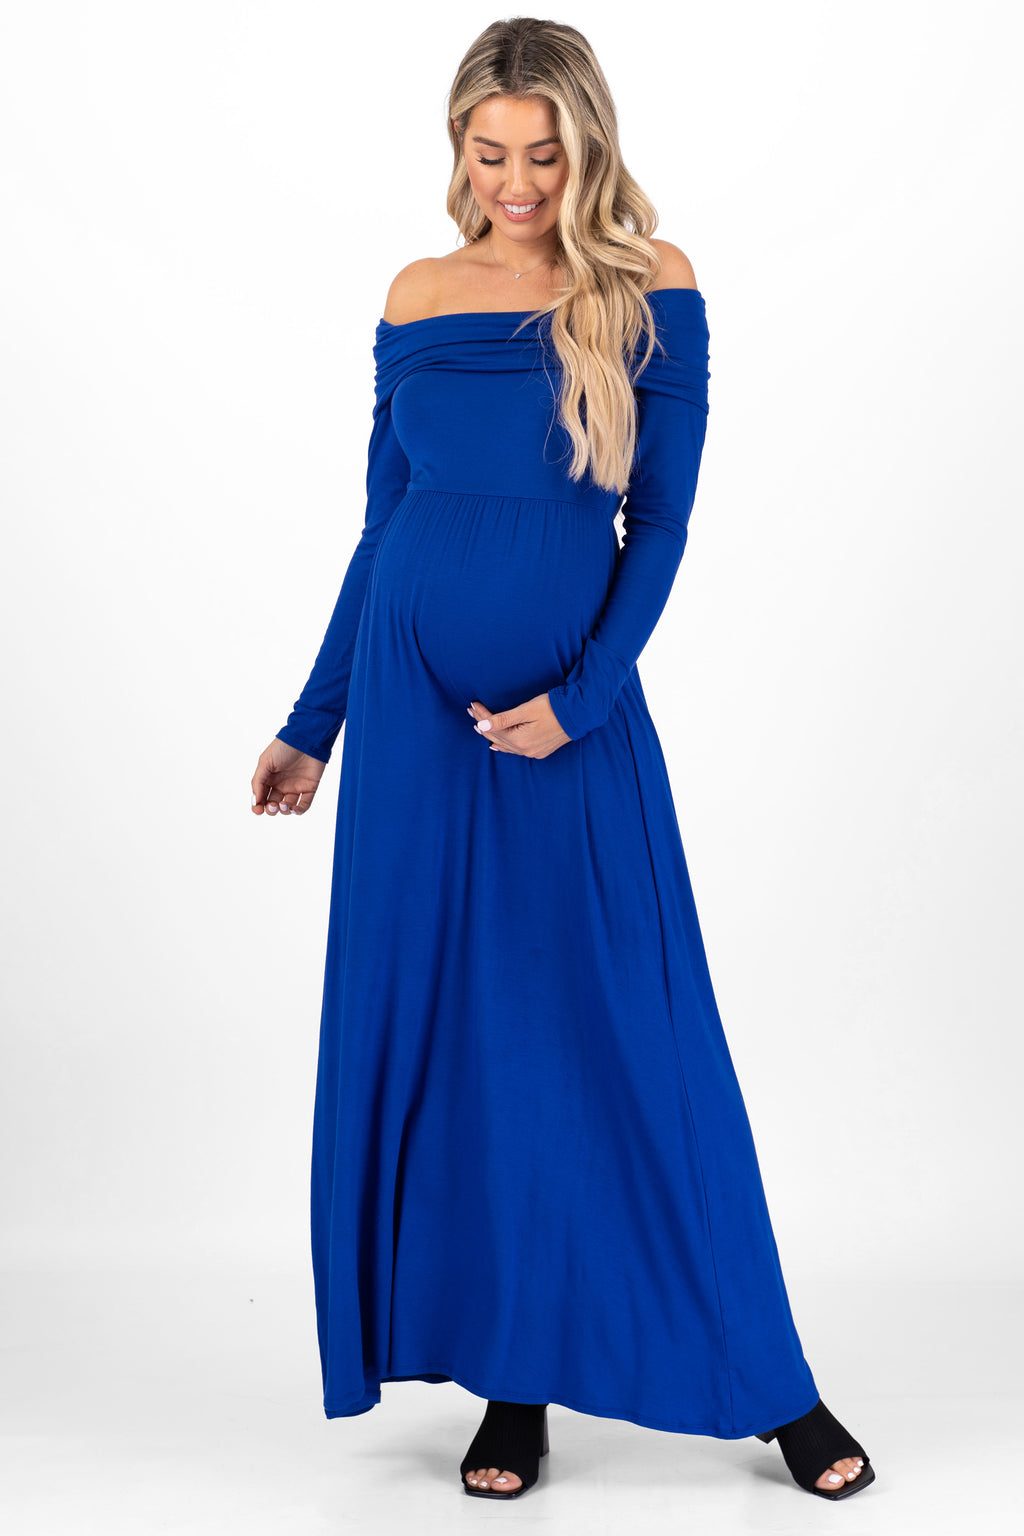 Over the Shoulder Maternity Dress – MotherBeeMaternity